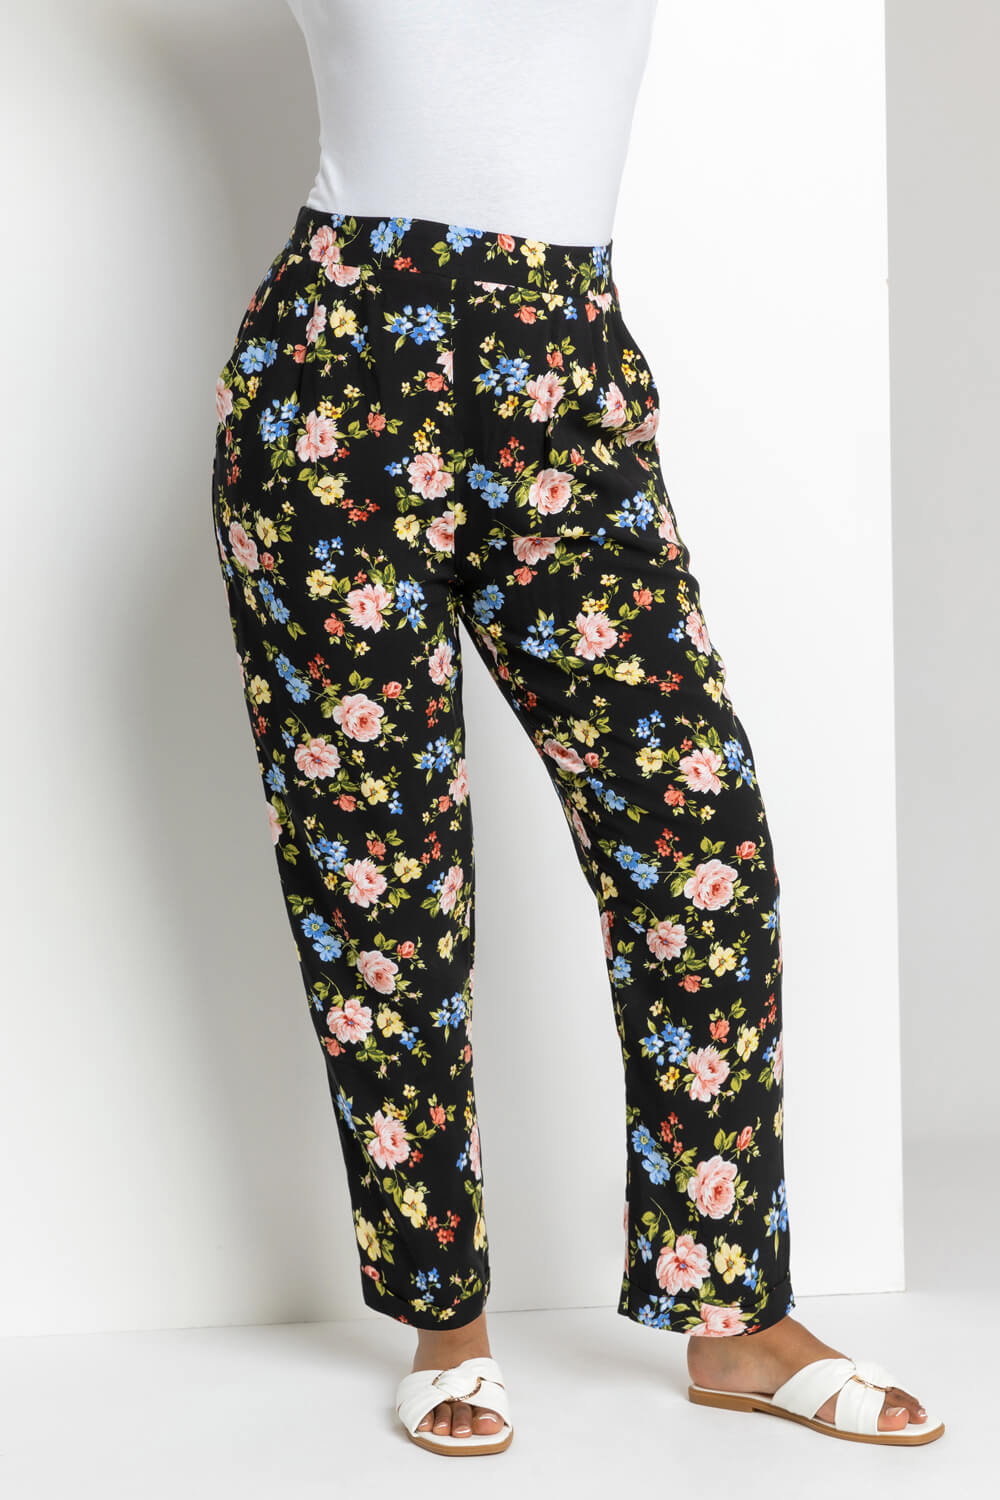 Black Petite Floral Print Tapered Trousers, Image 2 of 4